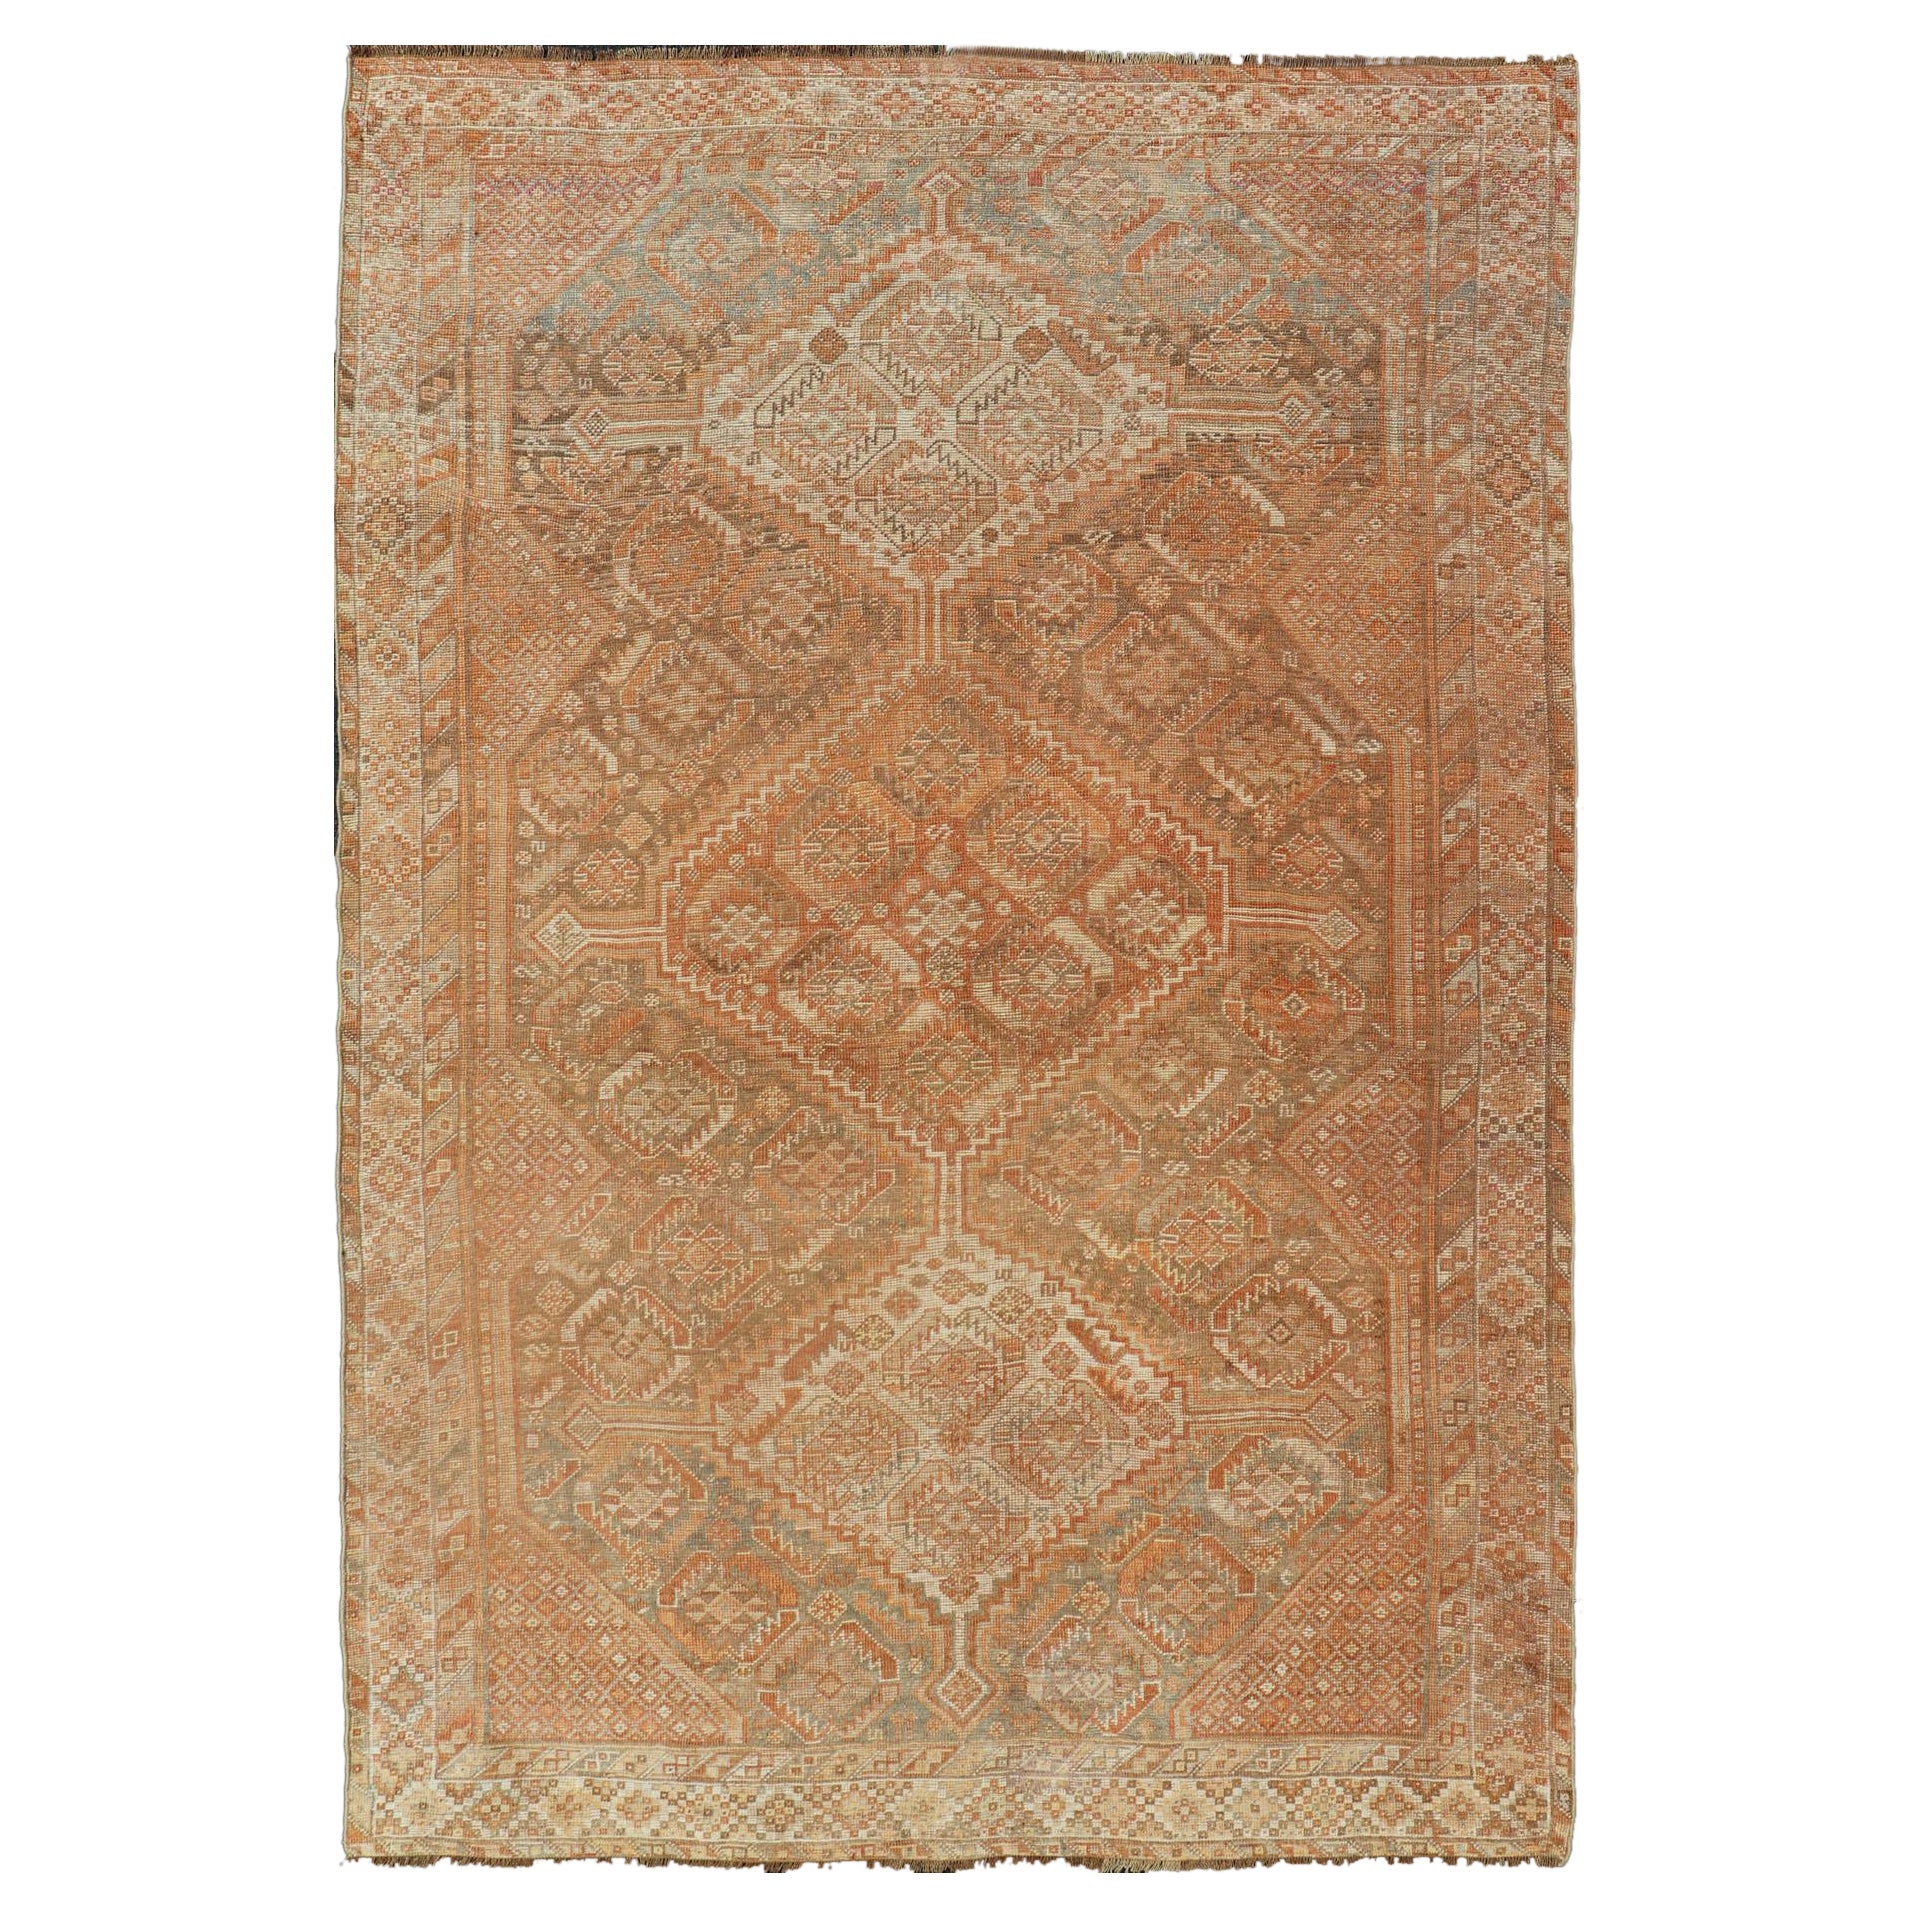 Antique Distressed Persian Shiraz Rug in Shades of Soft Orange, Lt. Brown, Gray For Sale